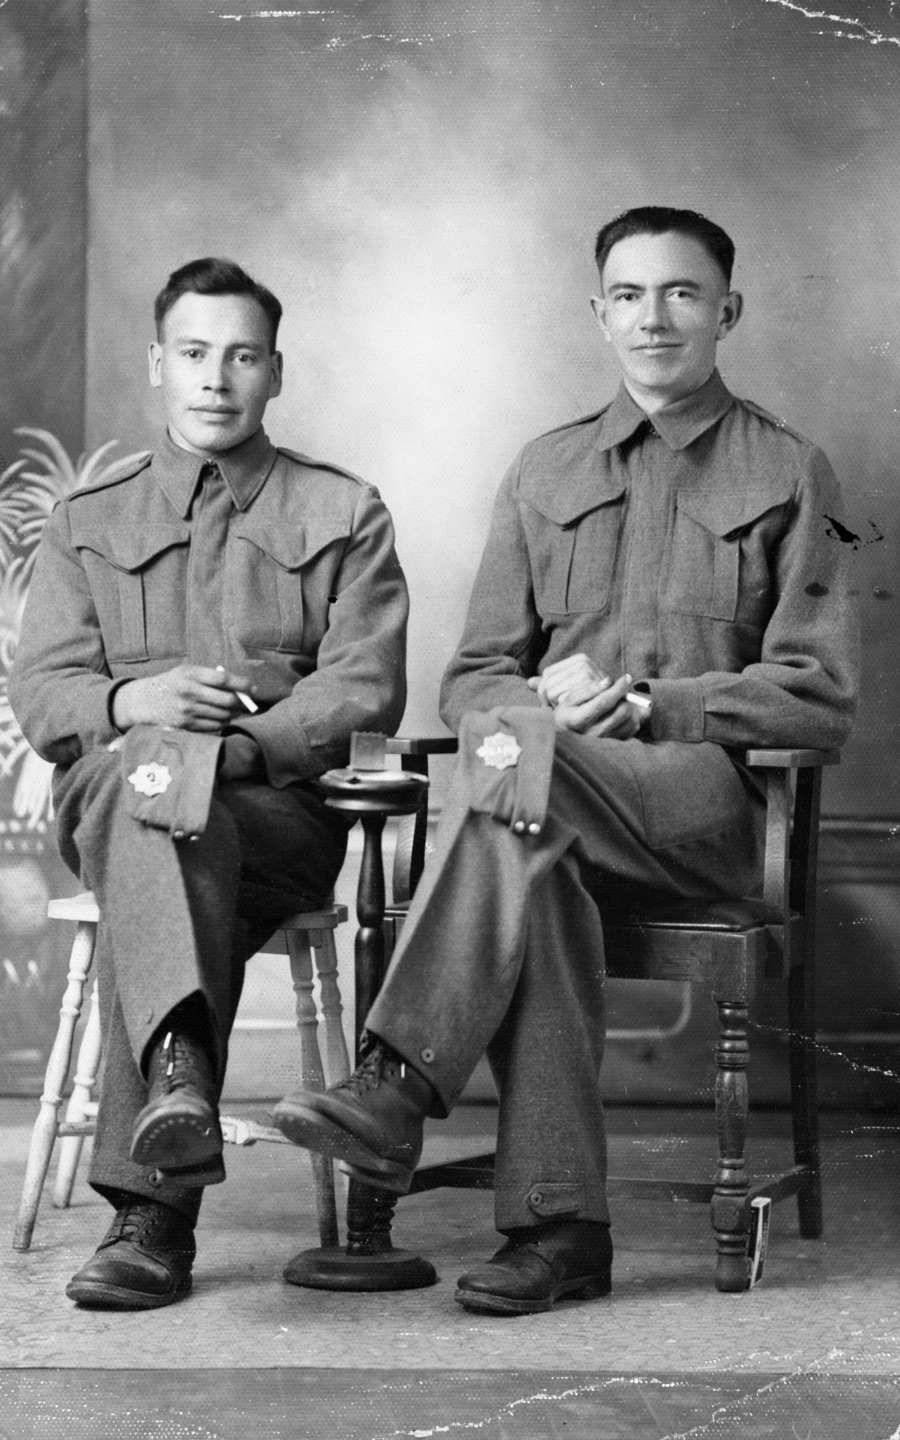 two men in uniform sitting on chairs